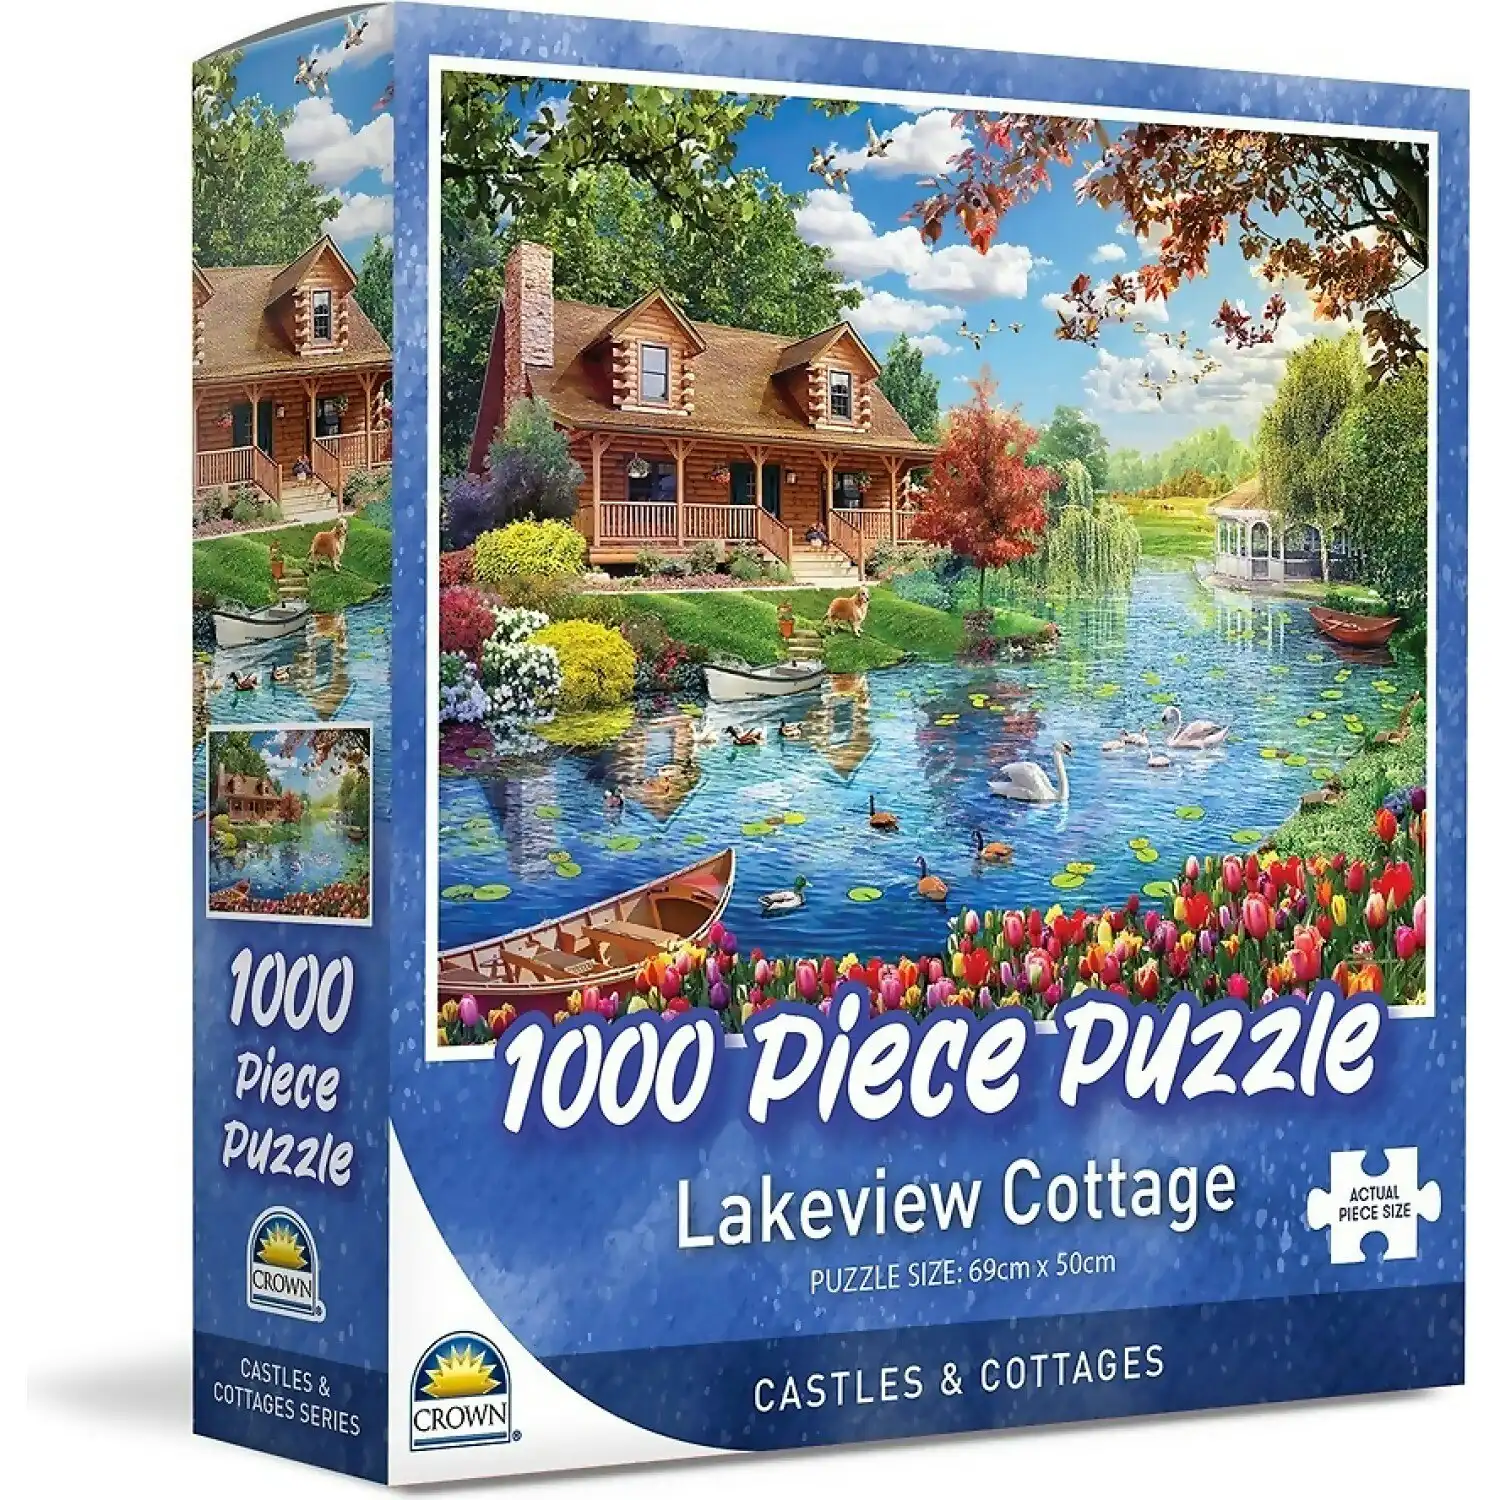 Crown - Lakeview Cottage Jigsaw Puzzle 1000pc